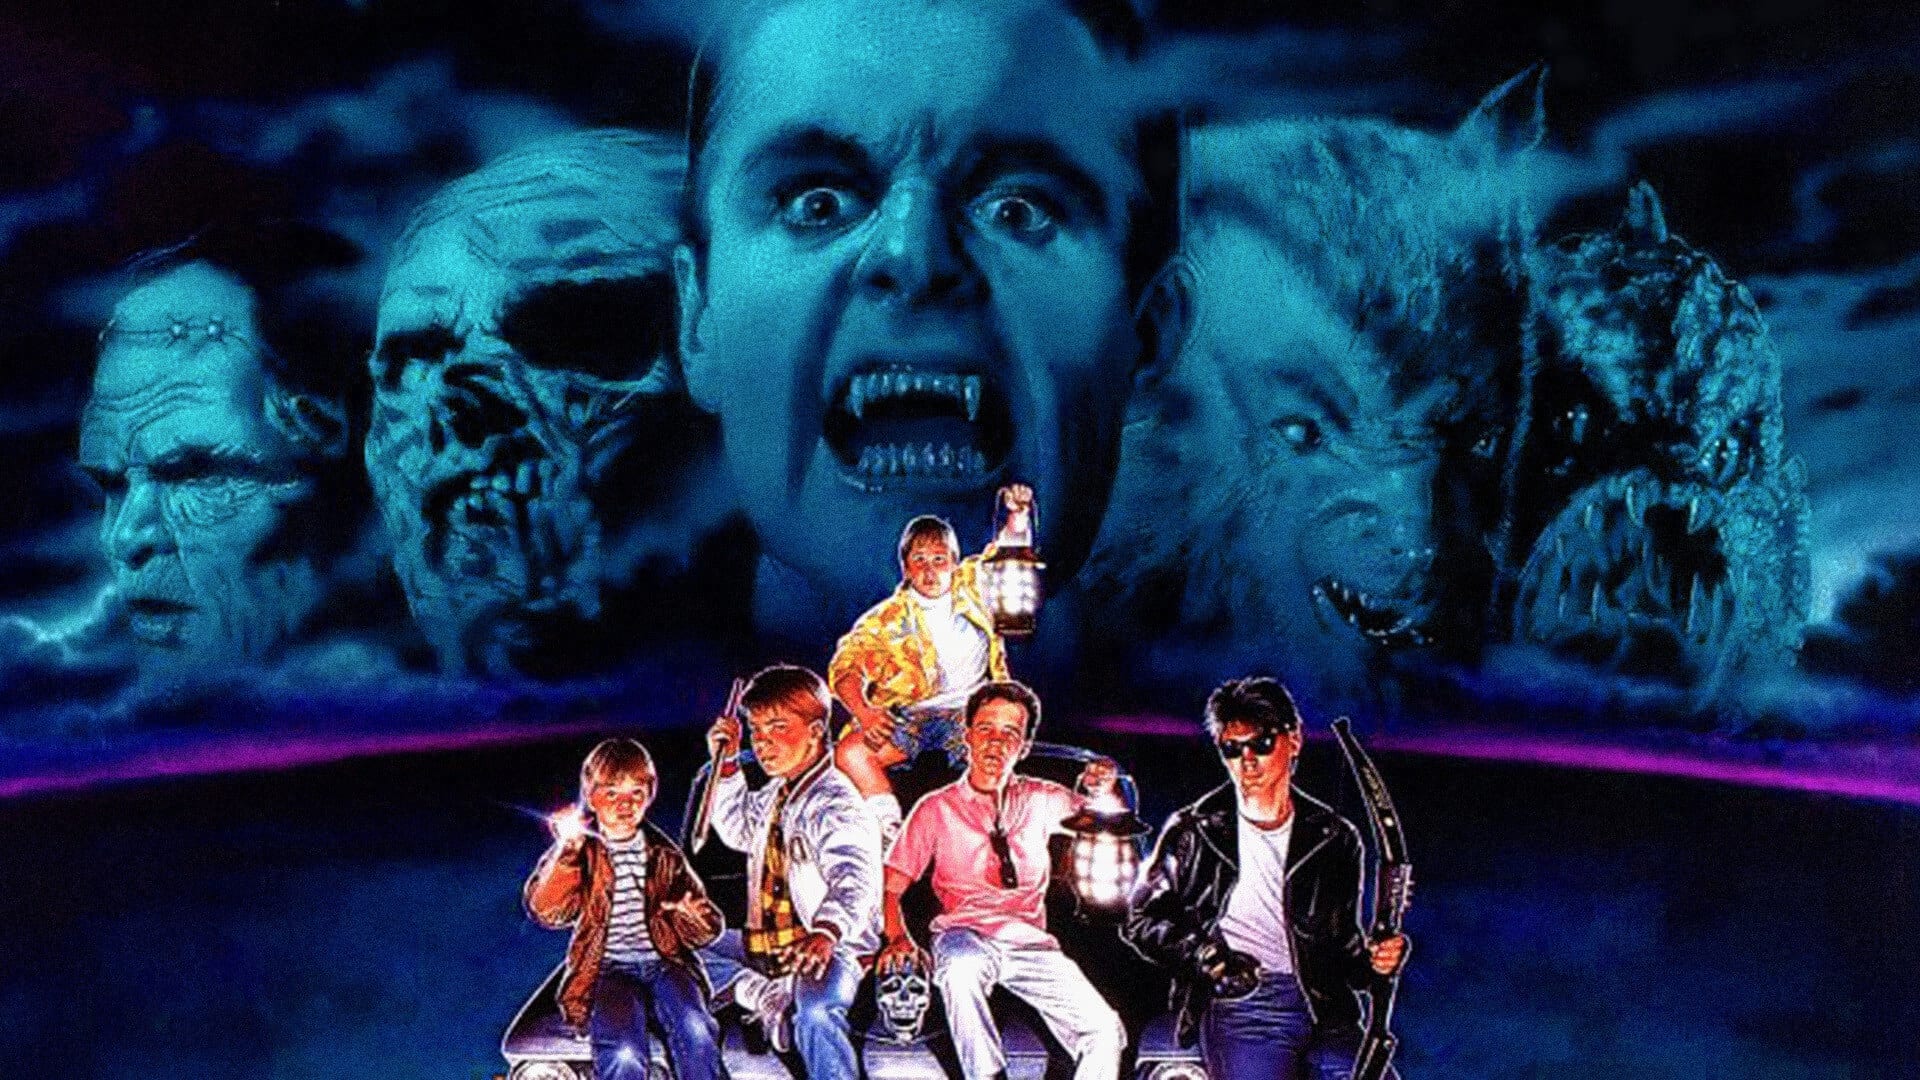 The Monster Squad